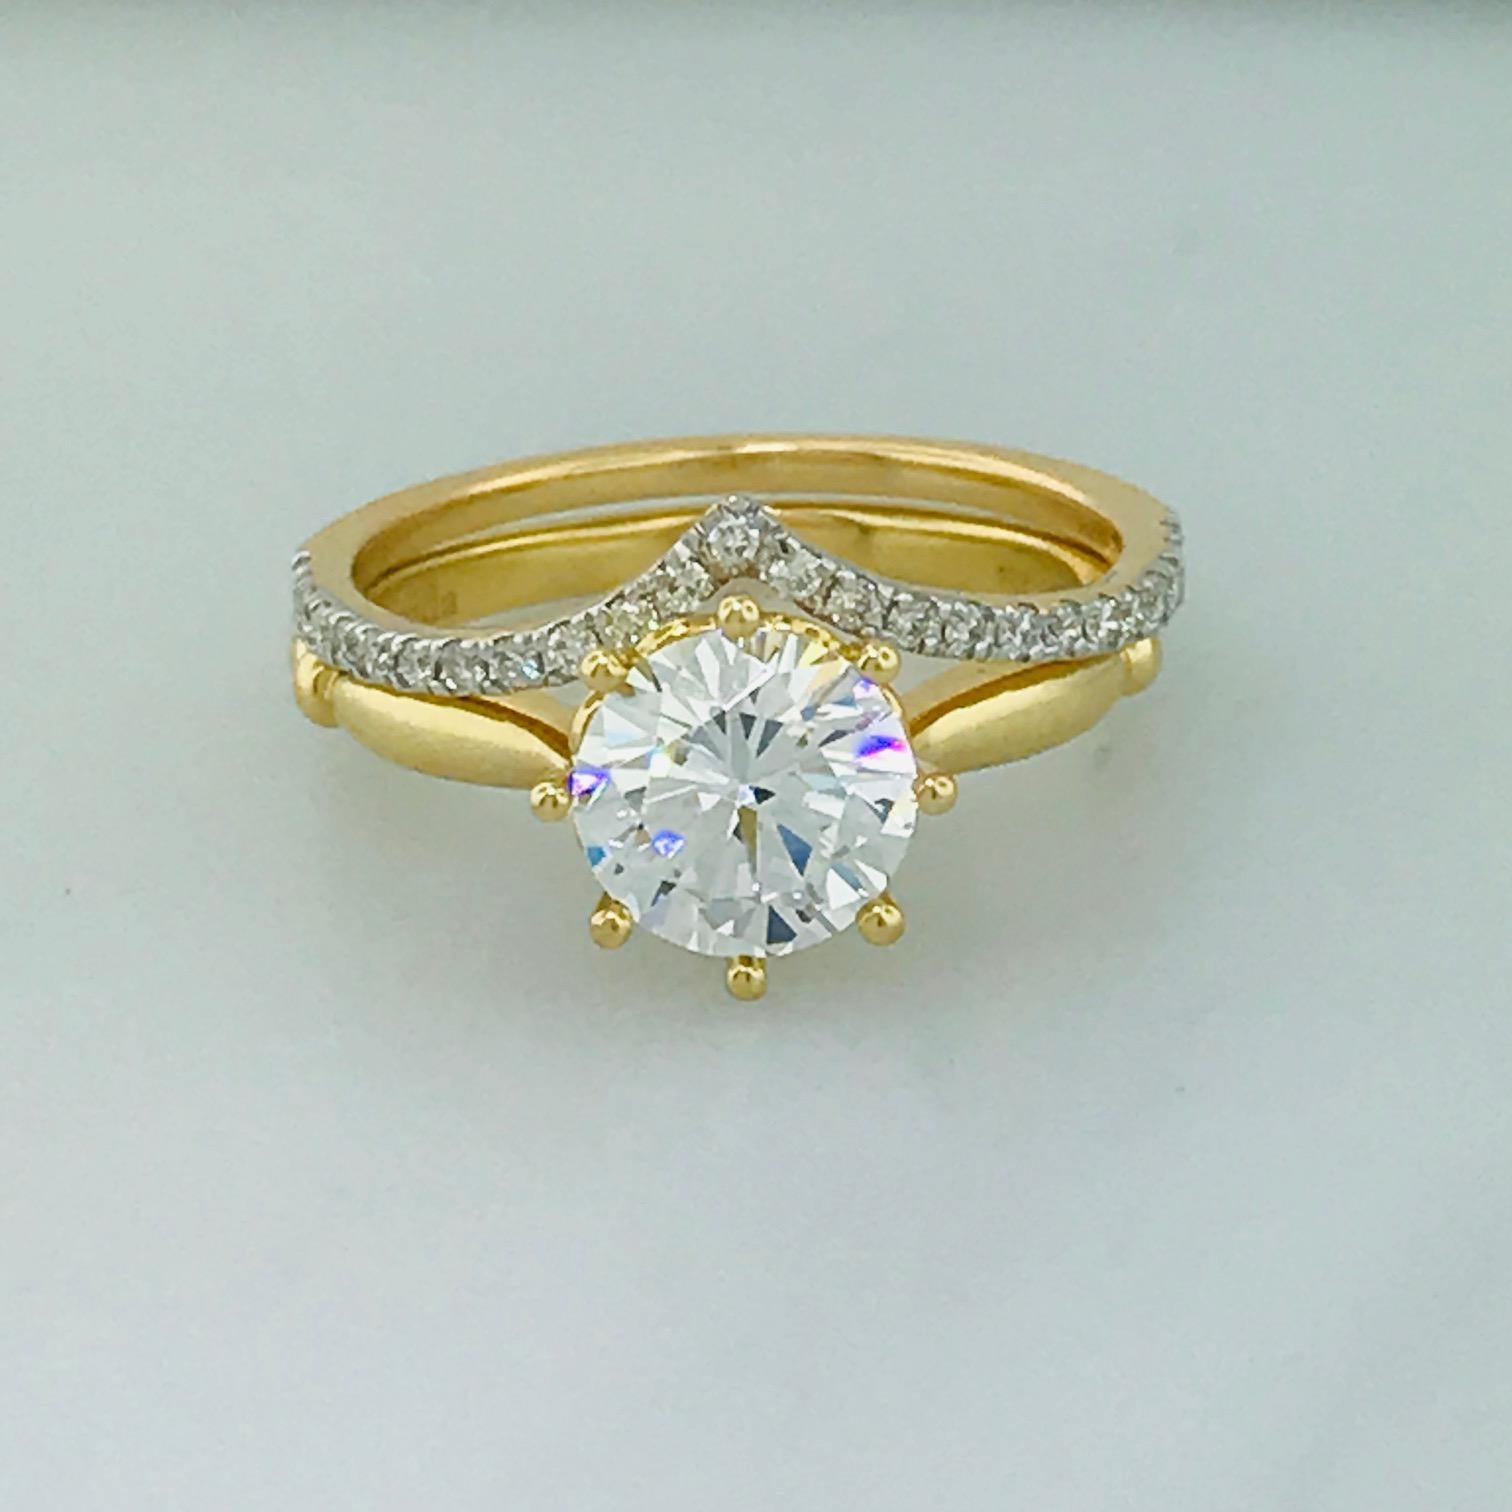 8 prong solitaire engagement ring